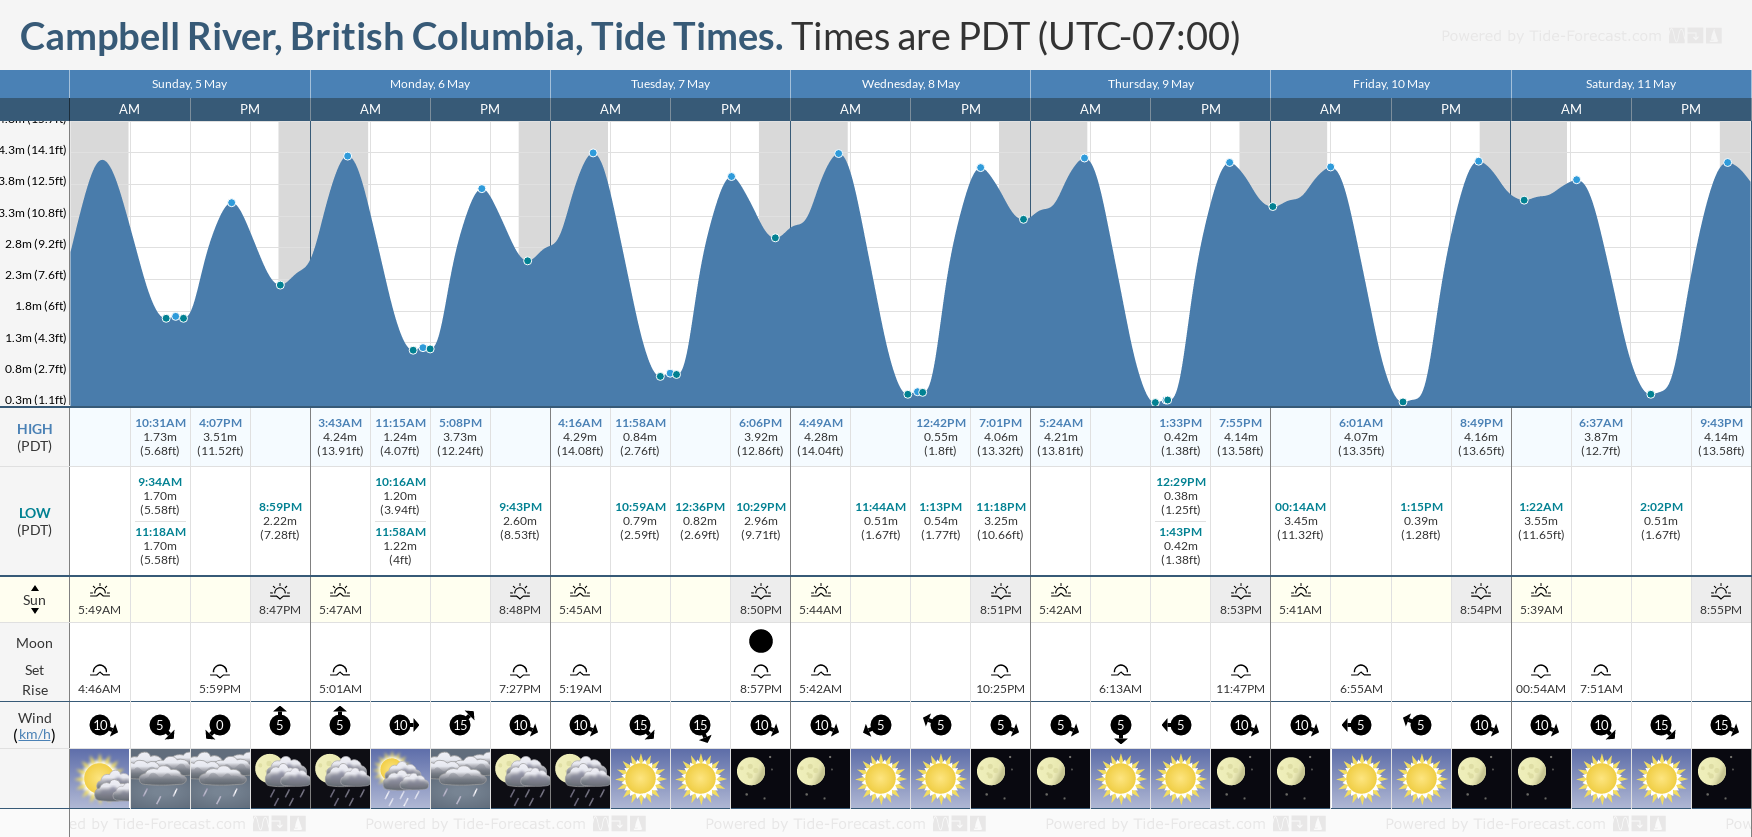 Campbell River, British Columbia Tide Chart including high and low tide tide times for the next 7 days